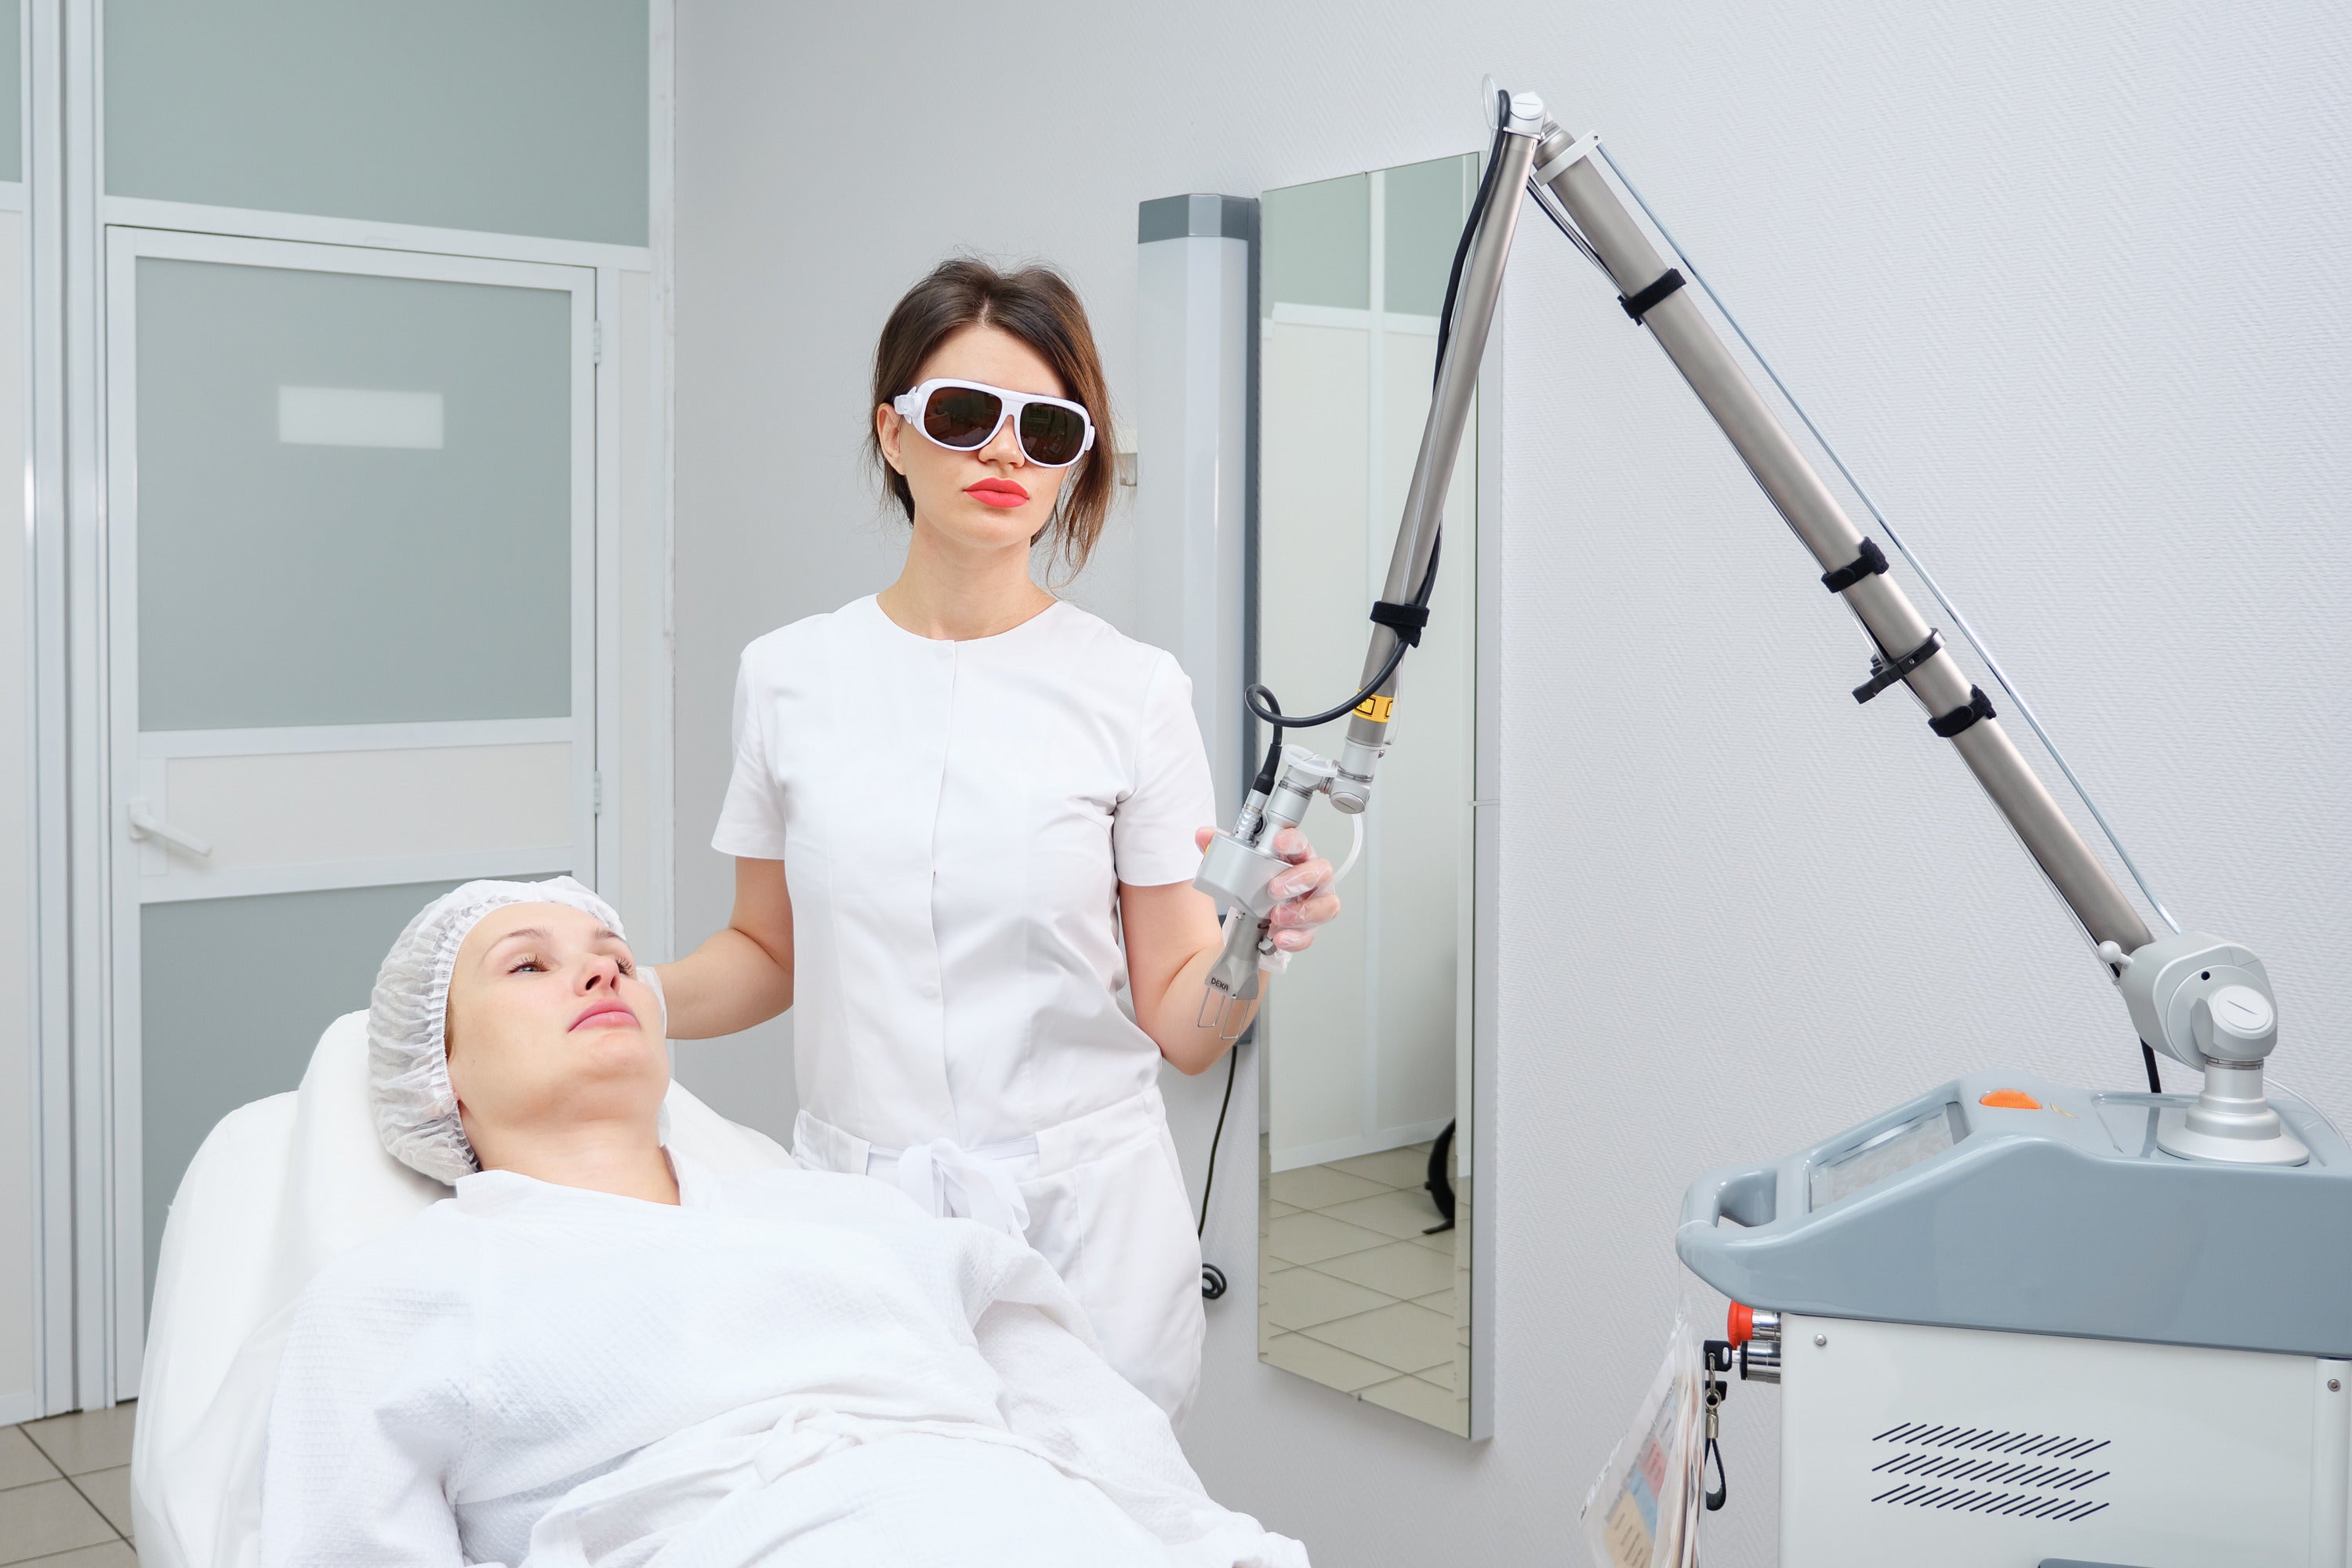 The use of lasers for hair removal on the face